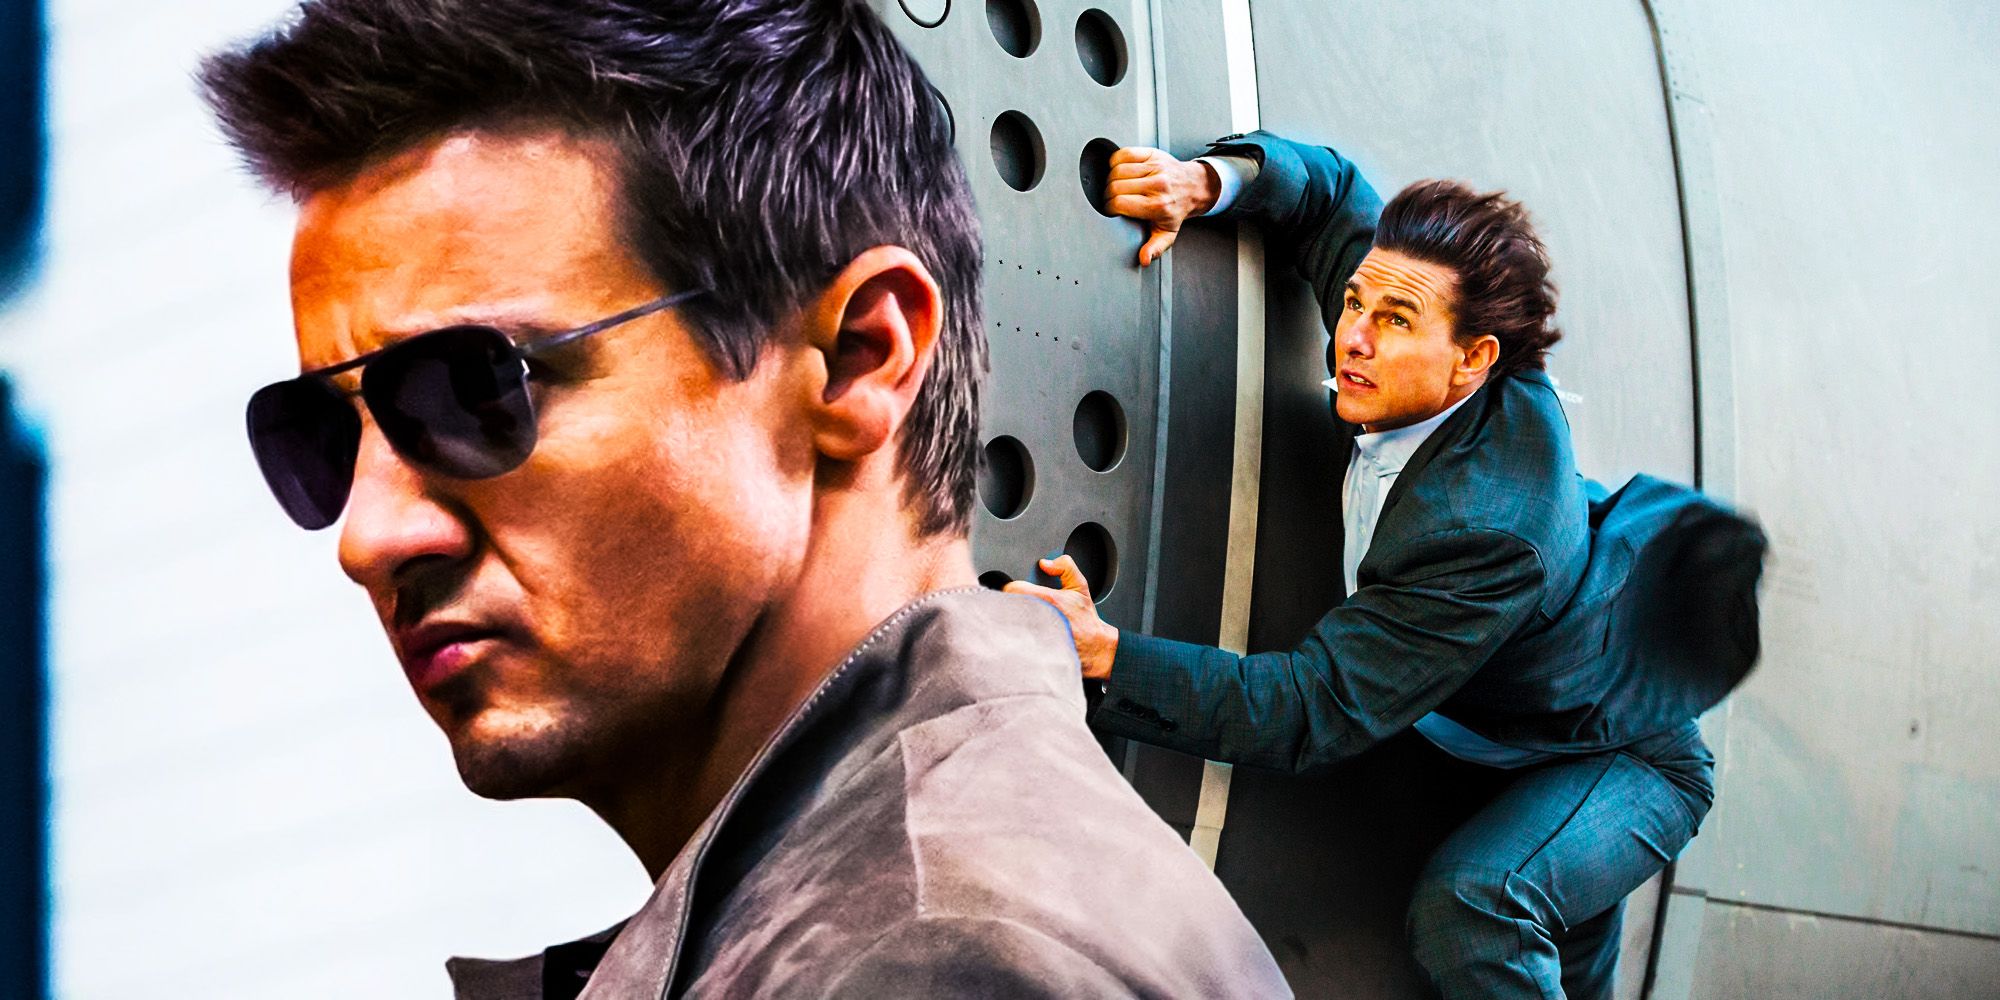 Top Gun 3 Replacing Tom Cruise Is Much Easier Than Mission: Impossible